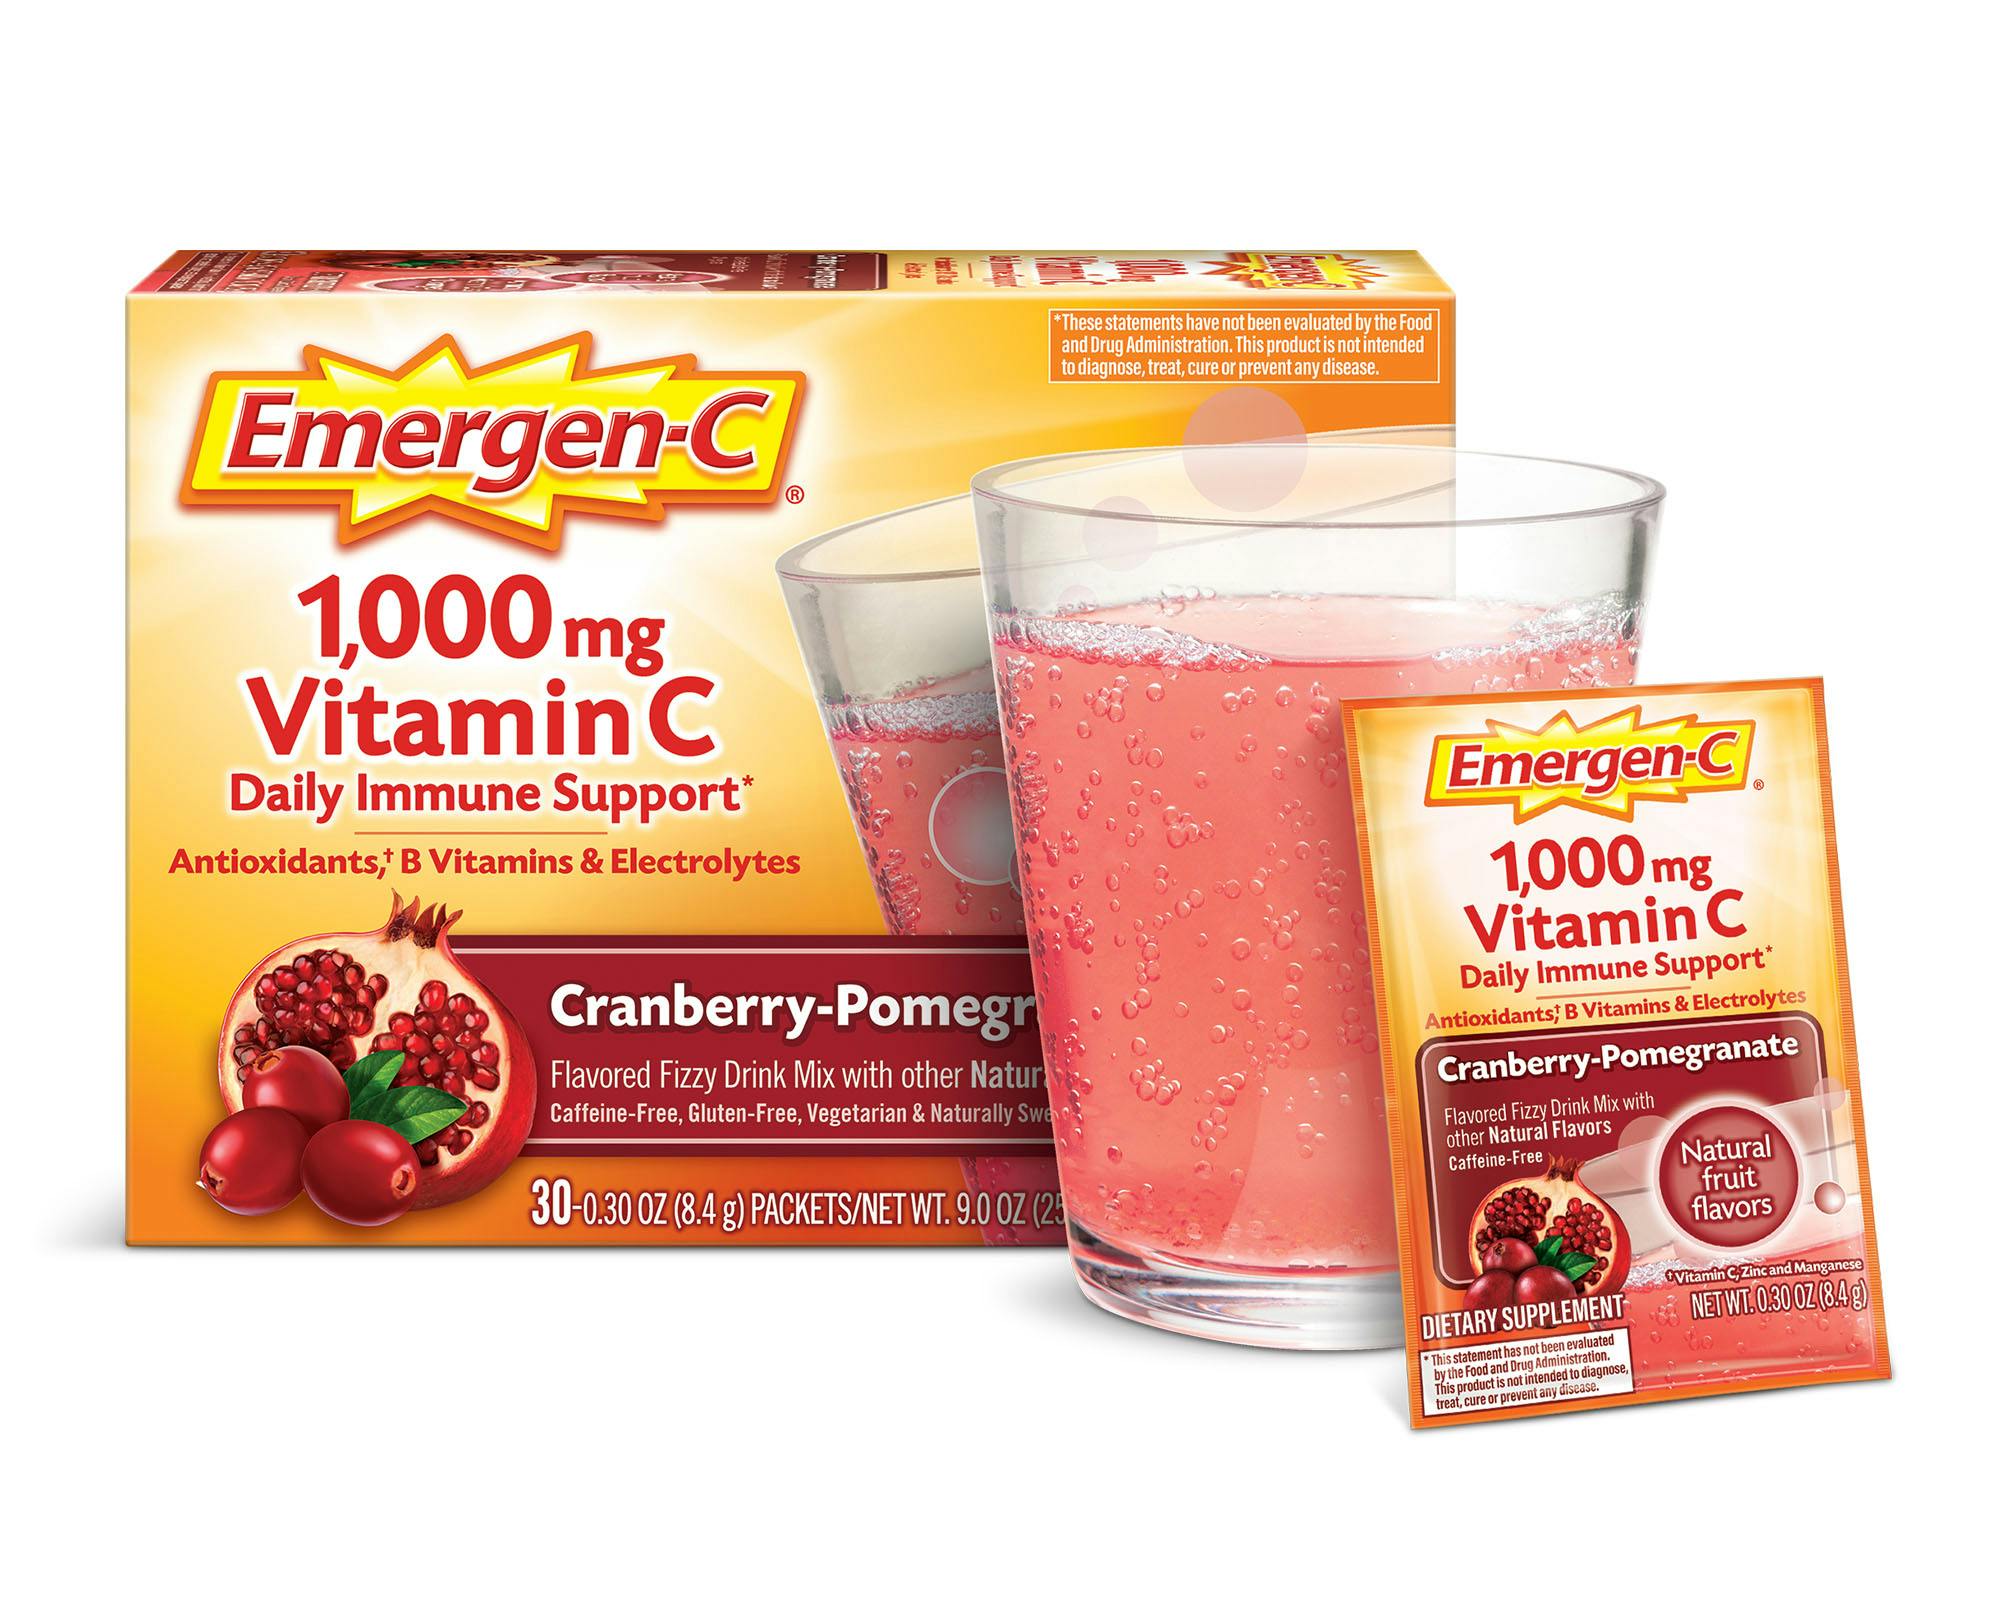 Cranberry-Pomegranate Original Immune Support box grouped with glass and packet